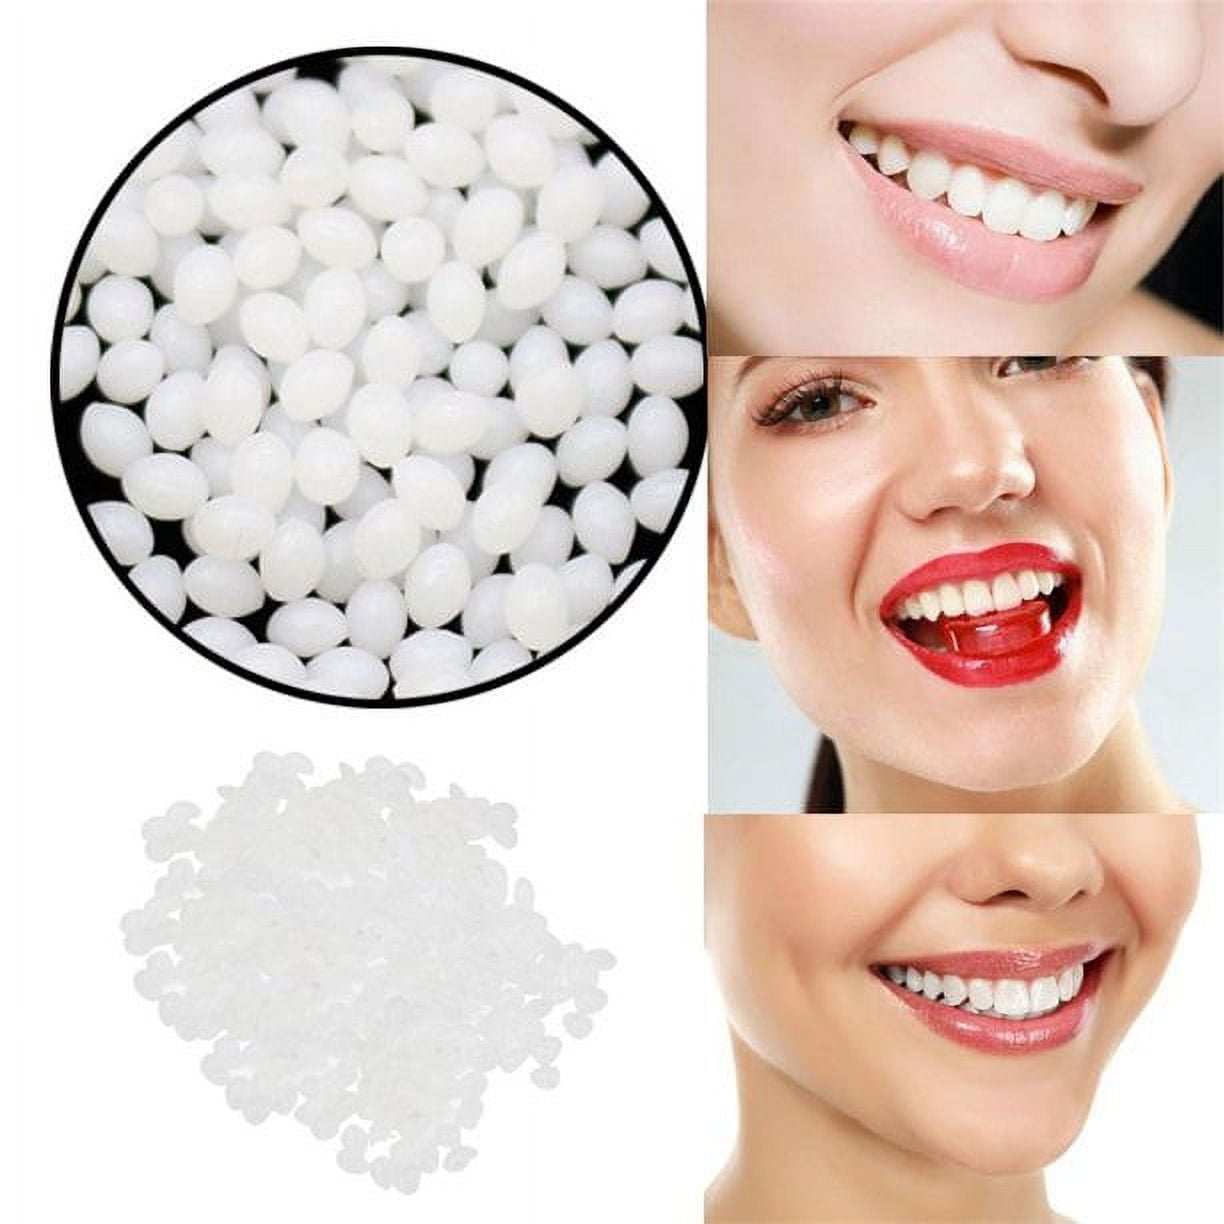 50g Multi-functional Temporary Tooth Repair Kit Moldable Thermal Fitting  Beads for Snap On Instant and Confident Smile Denture Adhesive Fake Teeth  Cosmetic Braces Veneer 